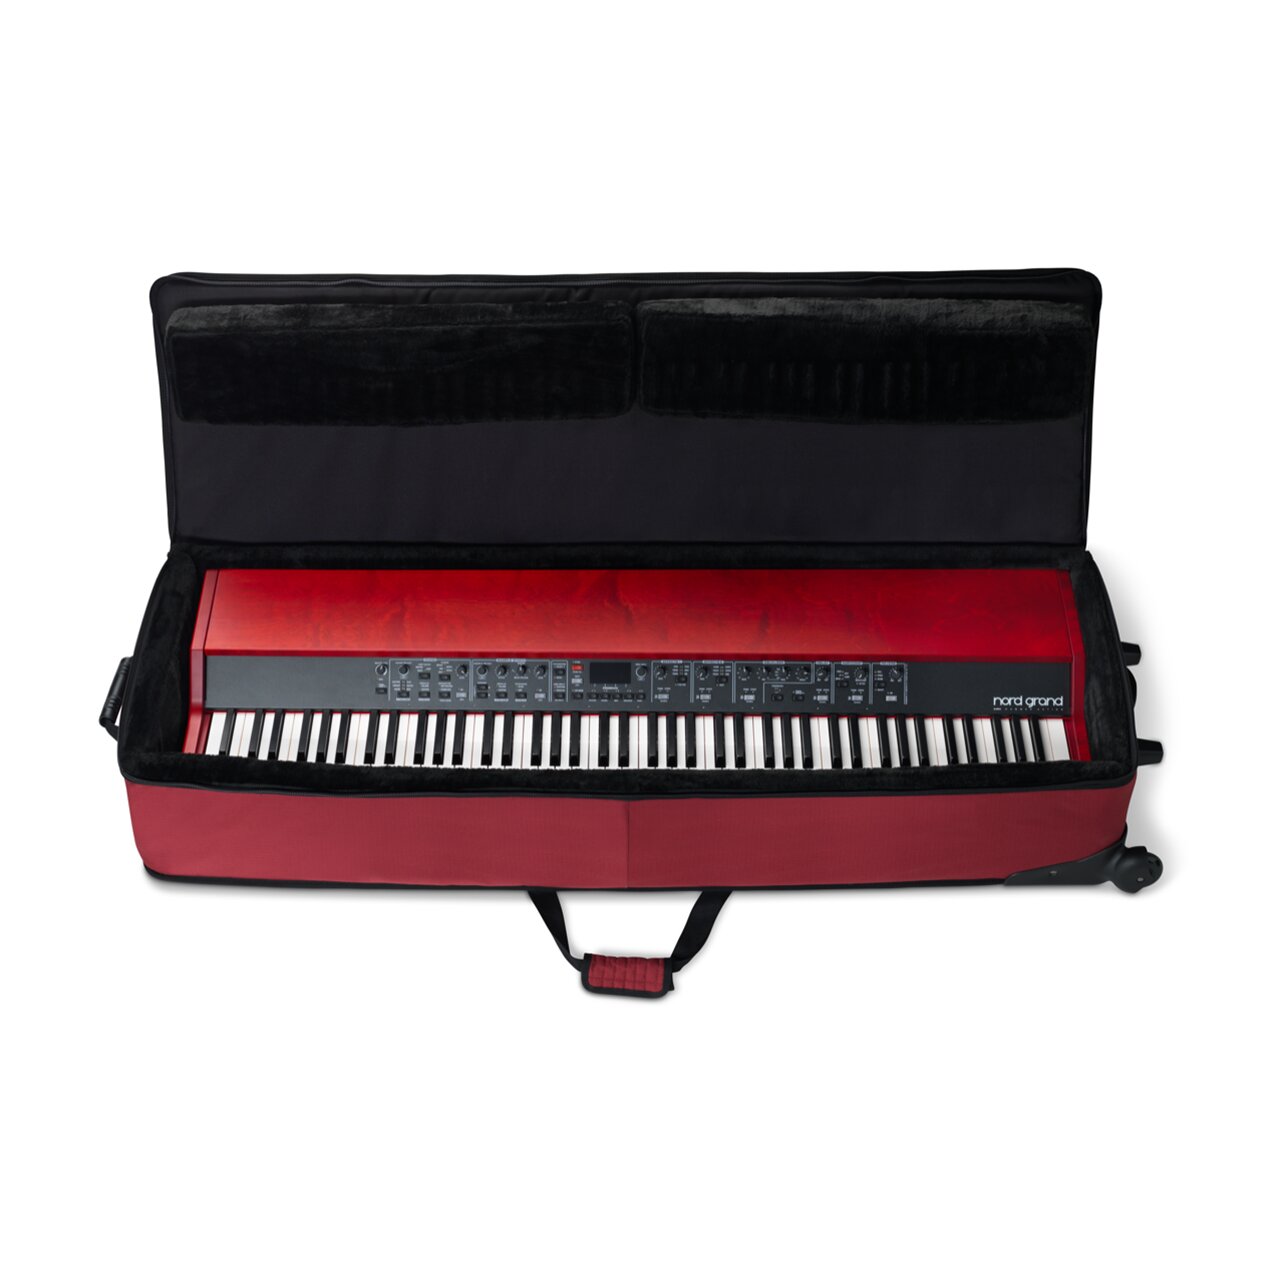 Clavia Nord Grand Softcase : photo 1